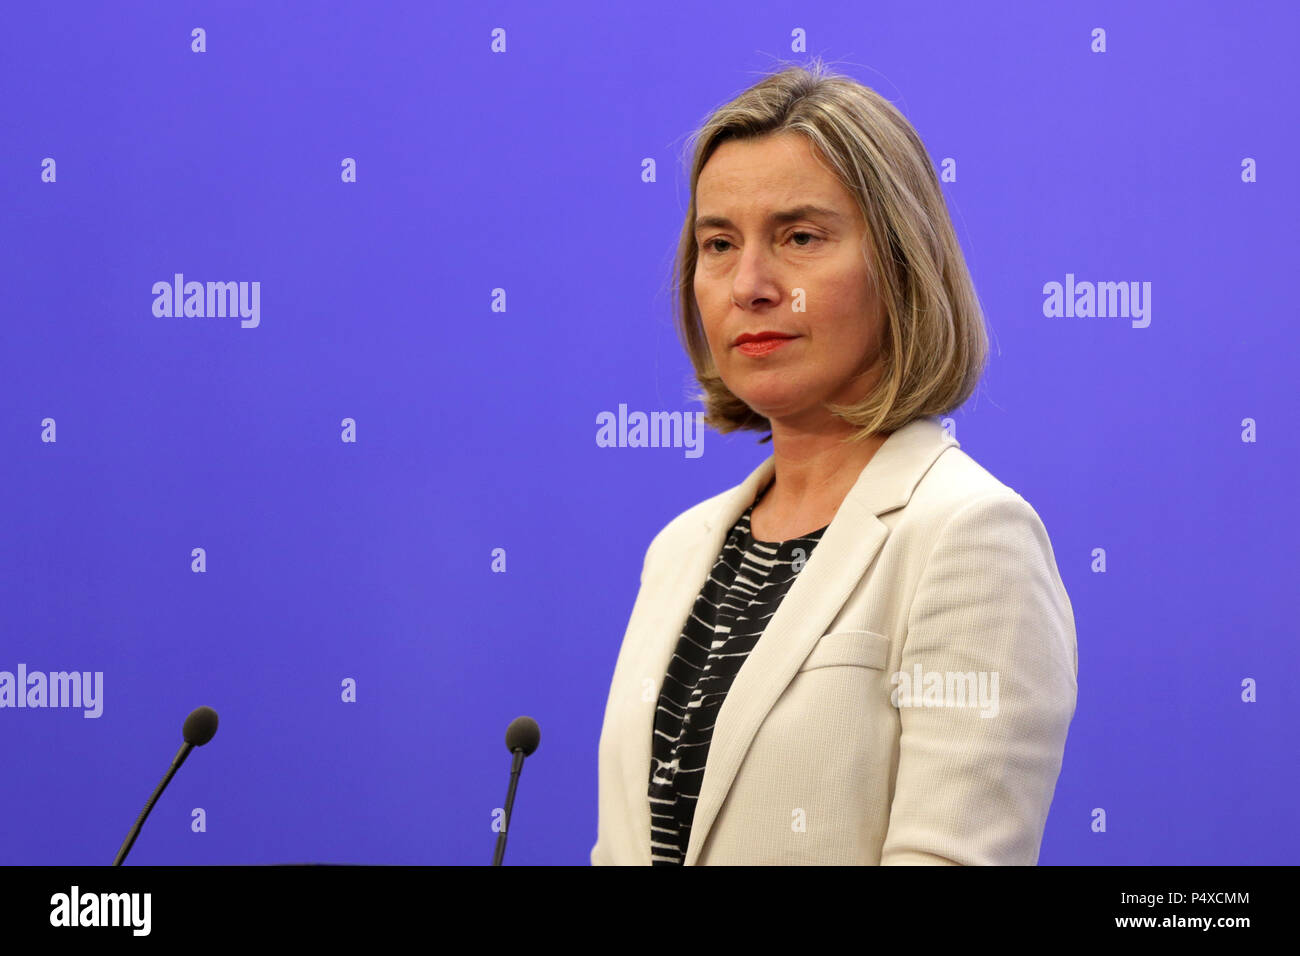 Sofia, Bulgaria - 5 May 2018: High Representative of the Union for Foreign Affairs and Security Policy Federica Mogherini attends a press conference d Stock Photo